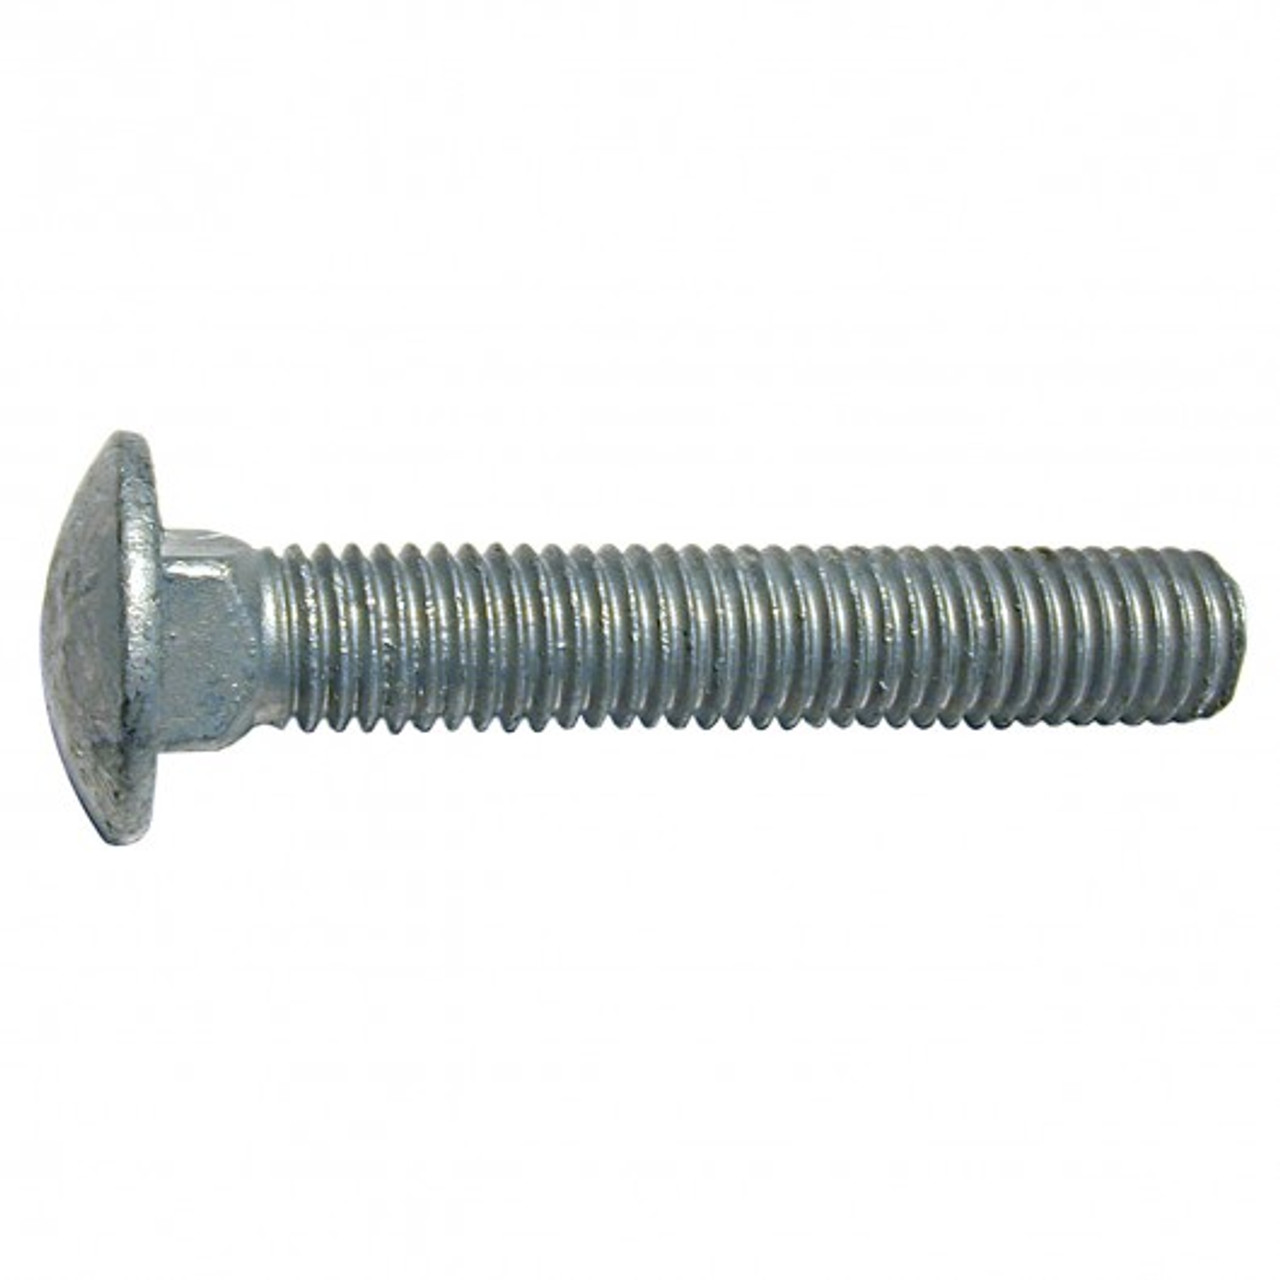 1/2X3 CARRIAGE BOLT UNC GALV